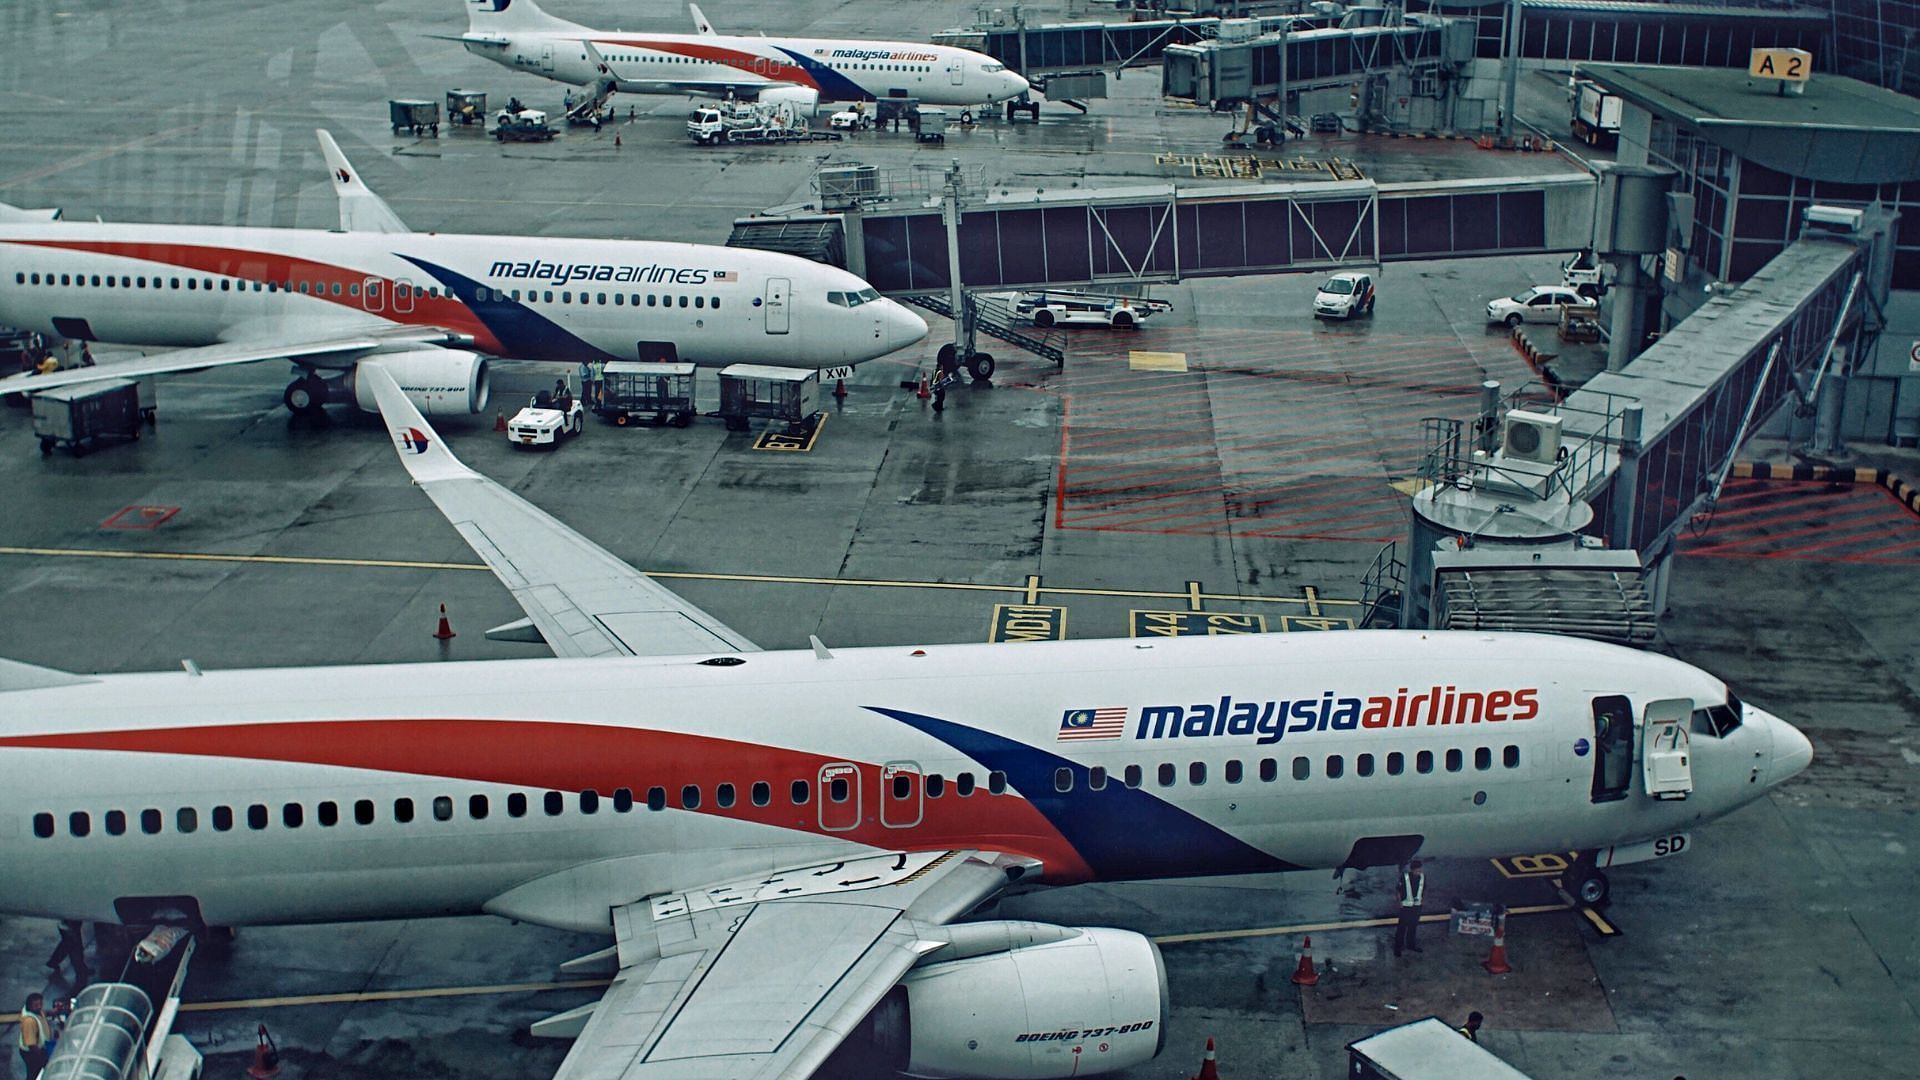 Was the MH370 Boeing abducted by UFOs? (Image via Getty Images)